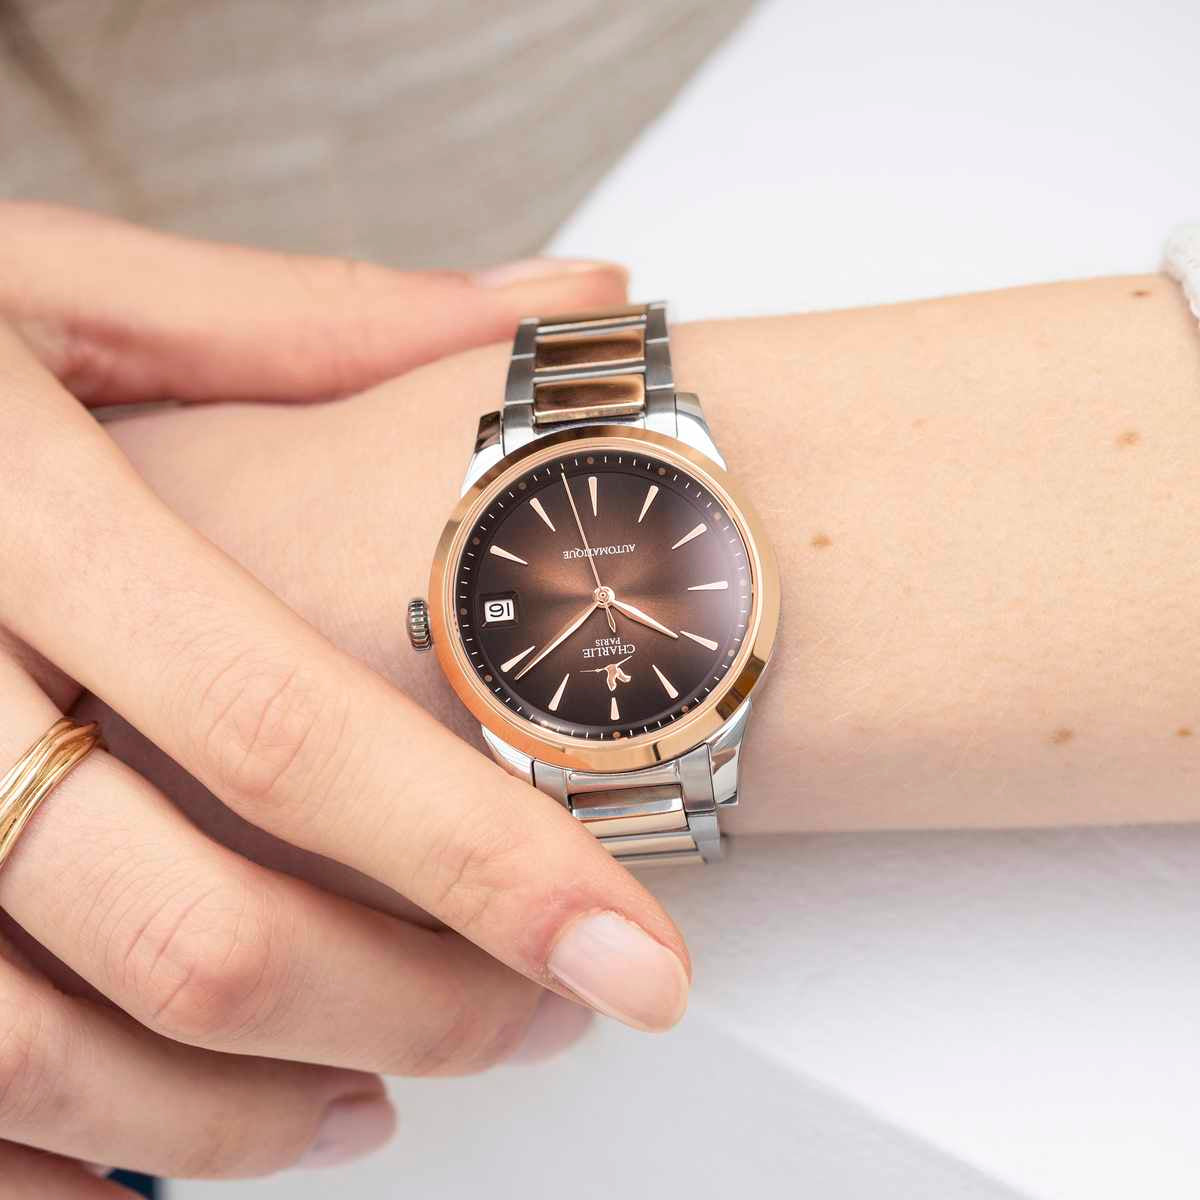 Aurore - Automatic Date - Gold & Brown